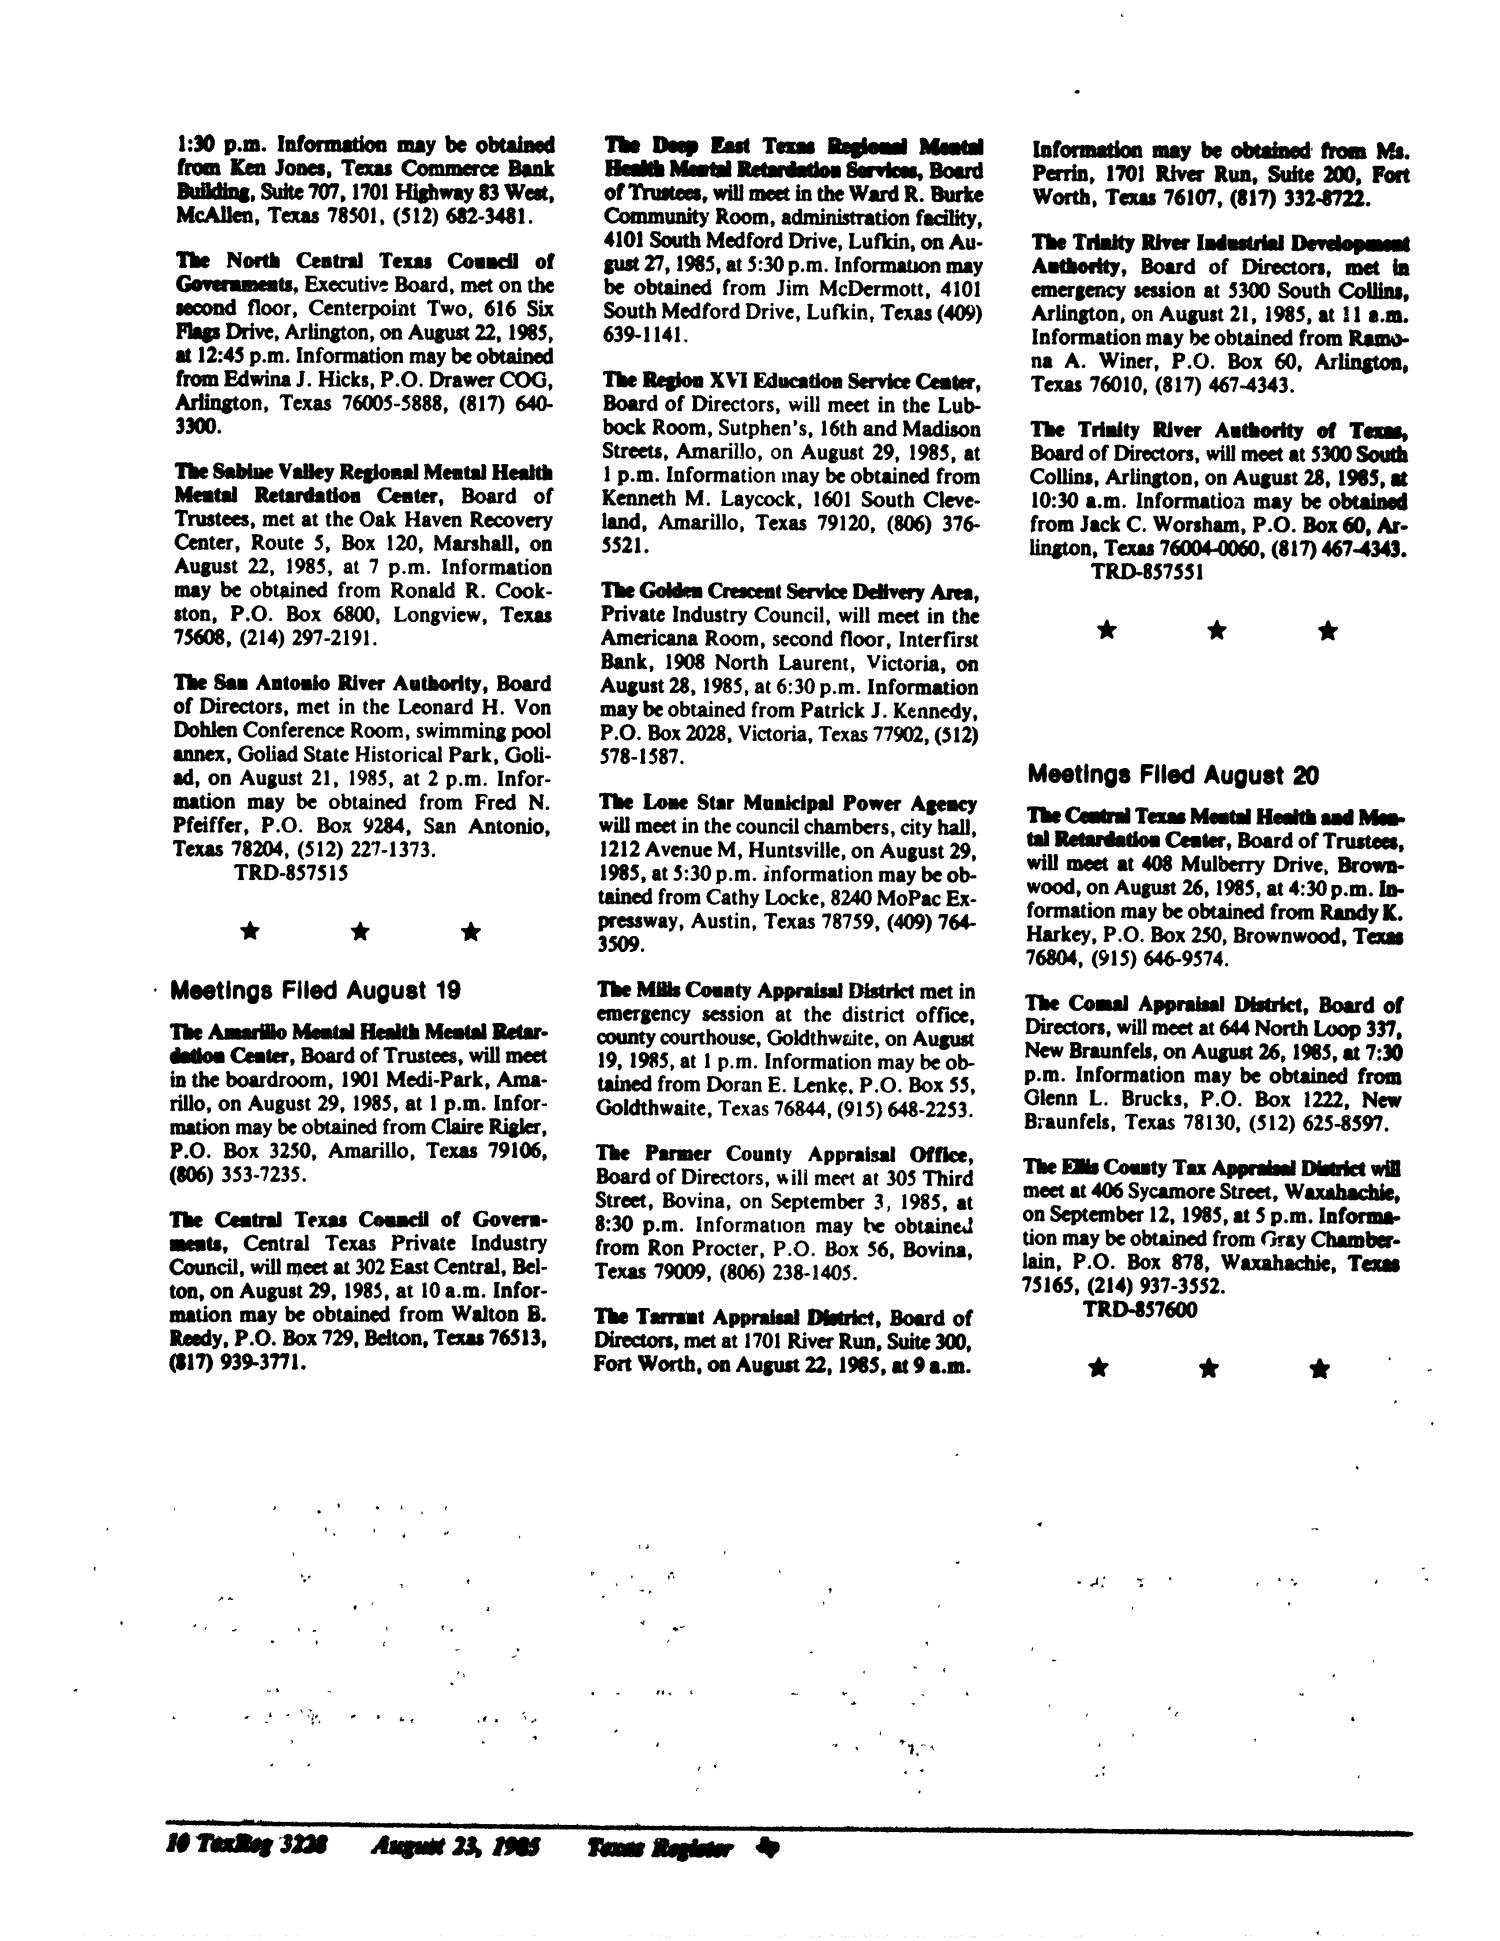 Texas Register, Volume 10, 63, Pages 3197-3236, August 23, 1985
                                                
                                                    3228
                                                